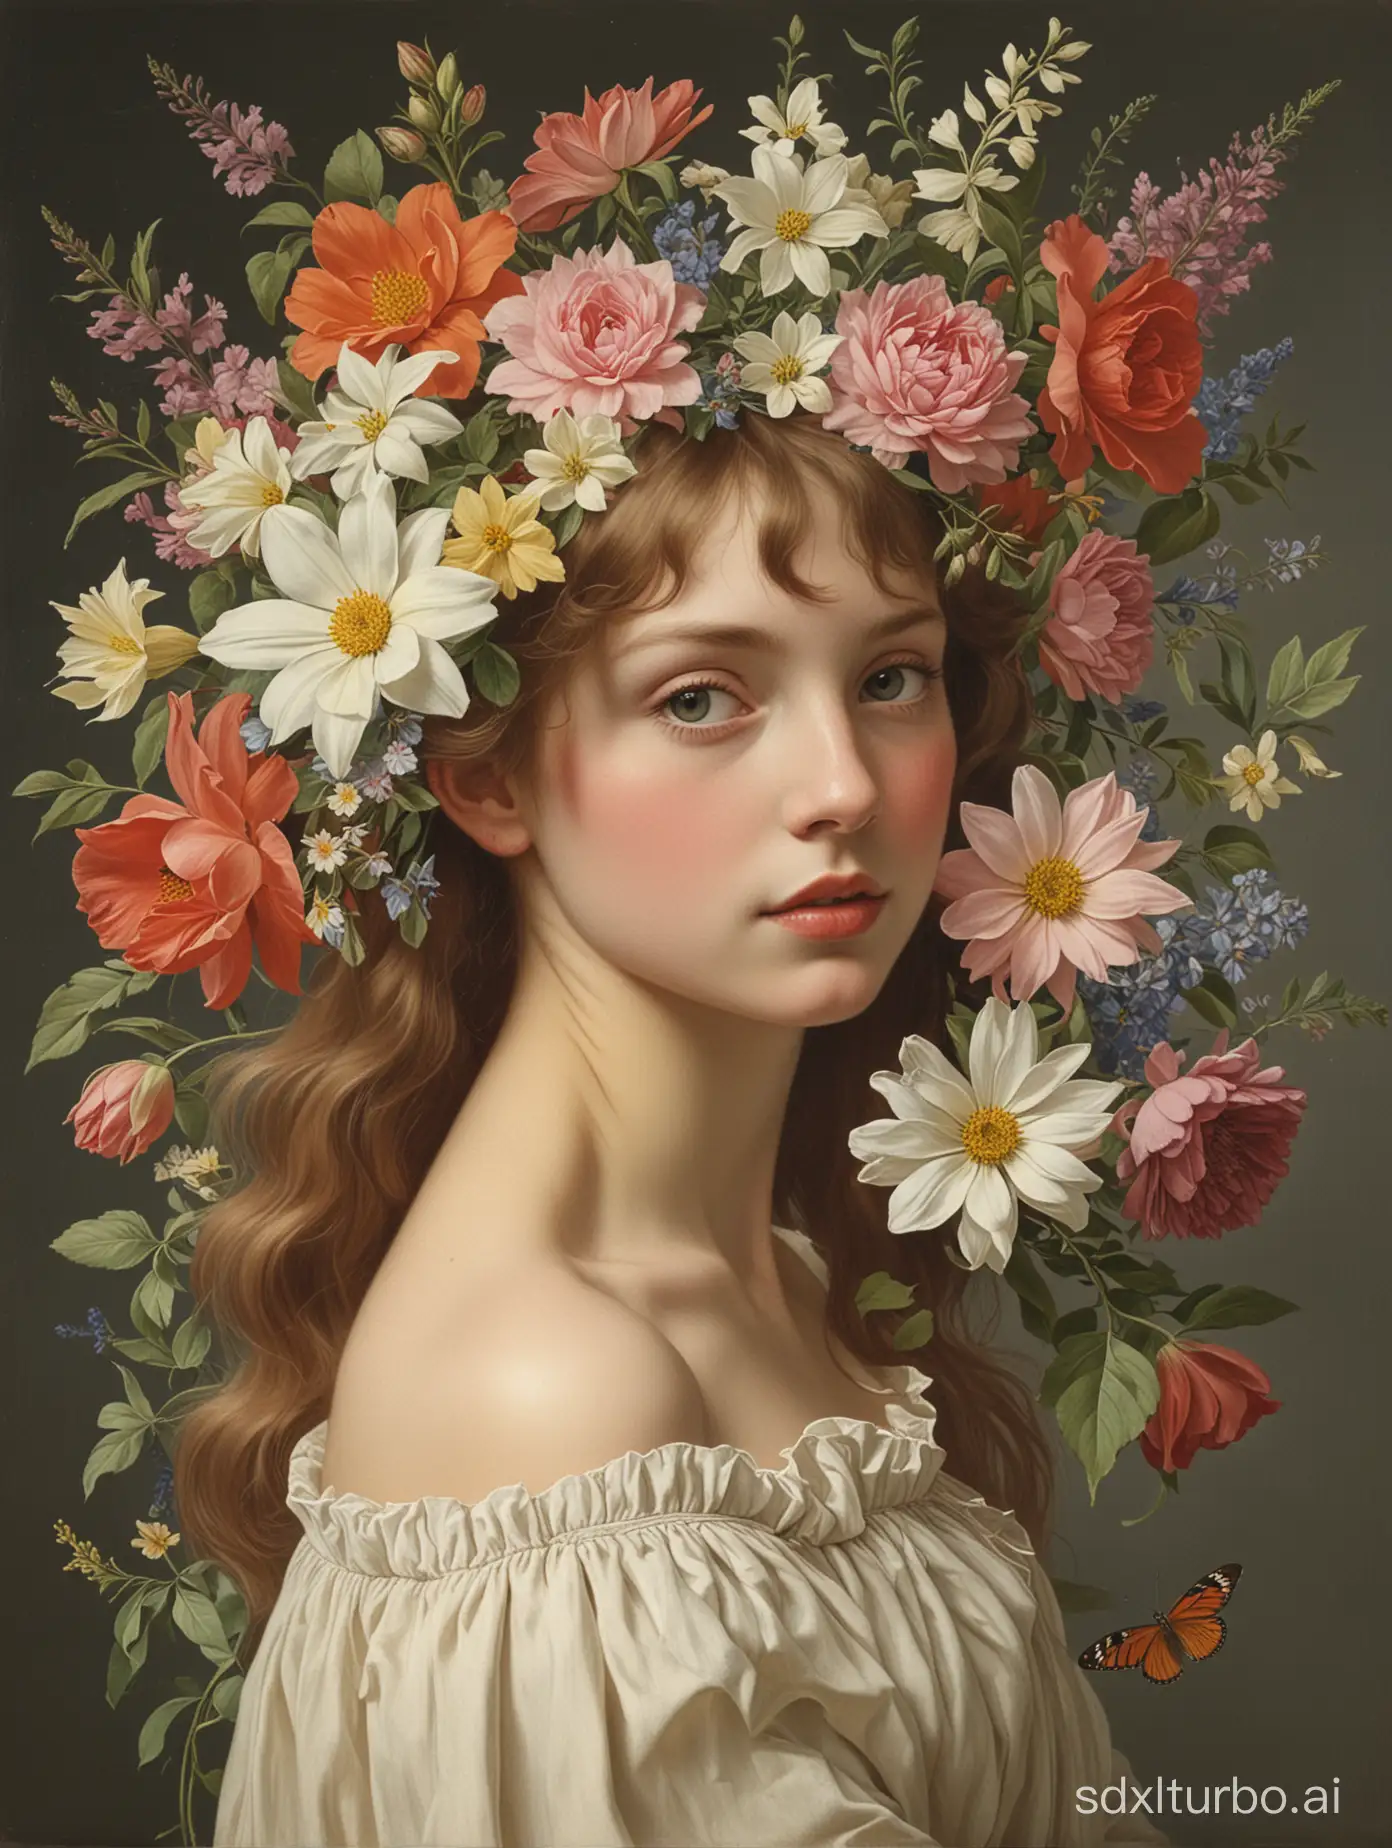 Flowers and Youth